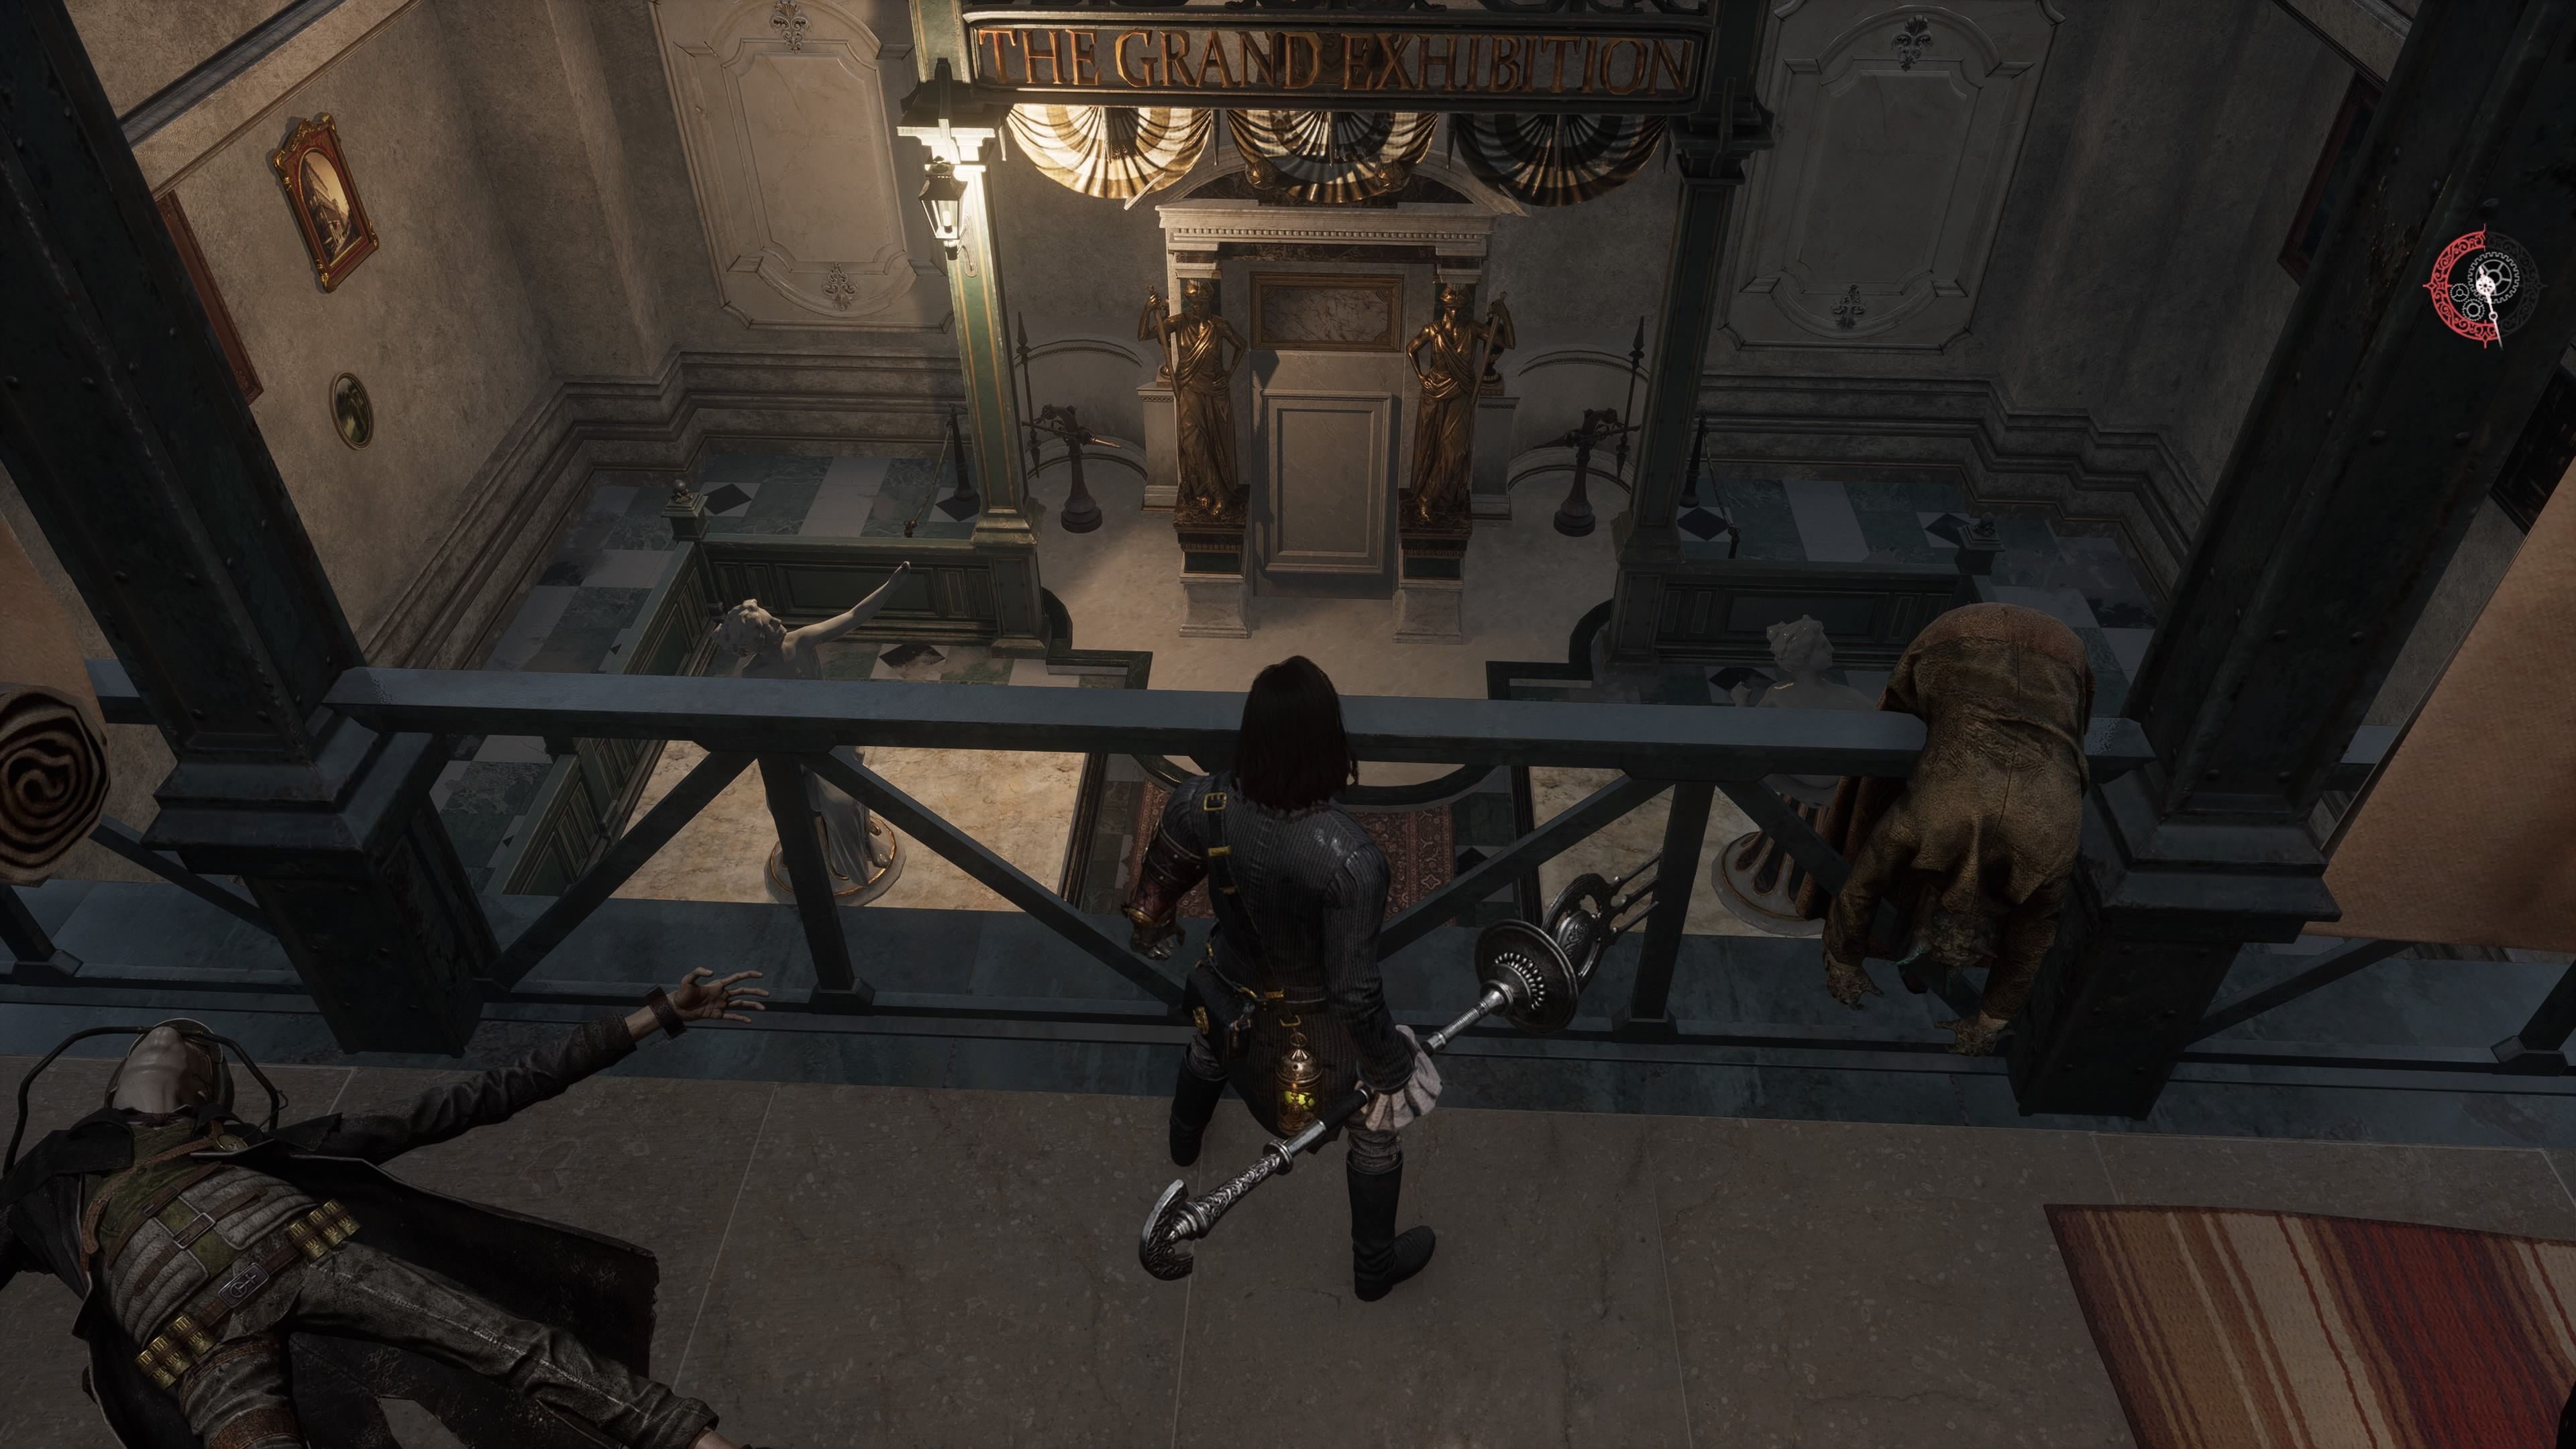 The statue room in the Grand Exhibition in Lies of P from above